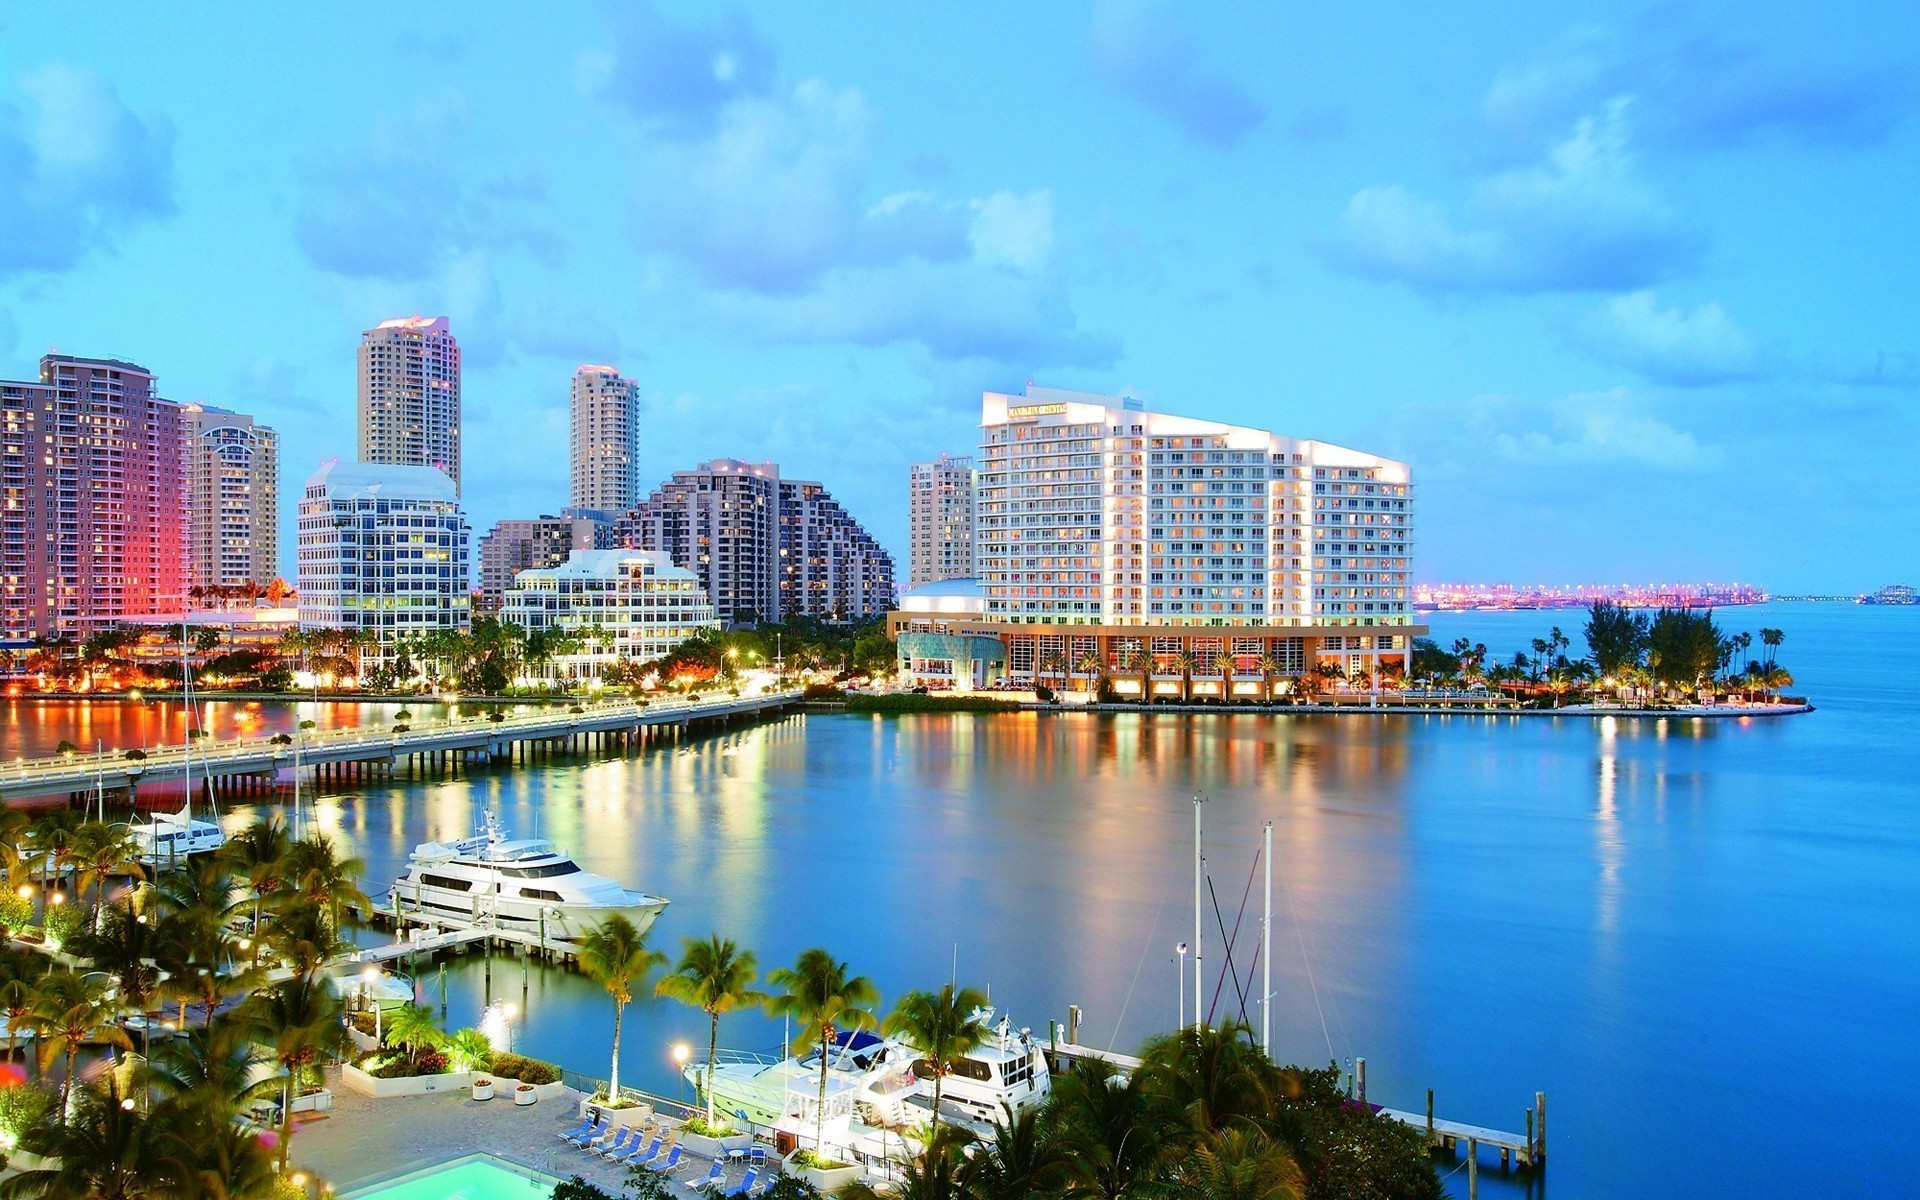 Miami wallpaper ·① Download free awesome HD wallpapers of Miami (the US city in Florida) for ...